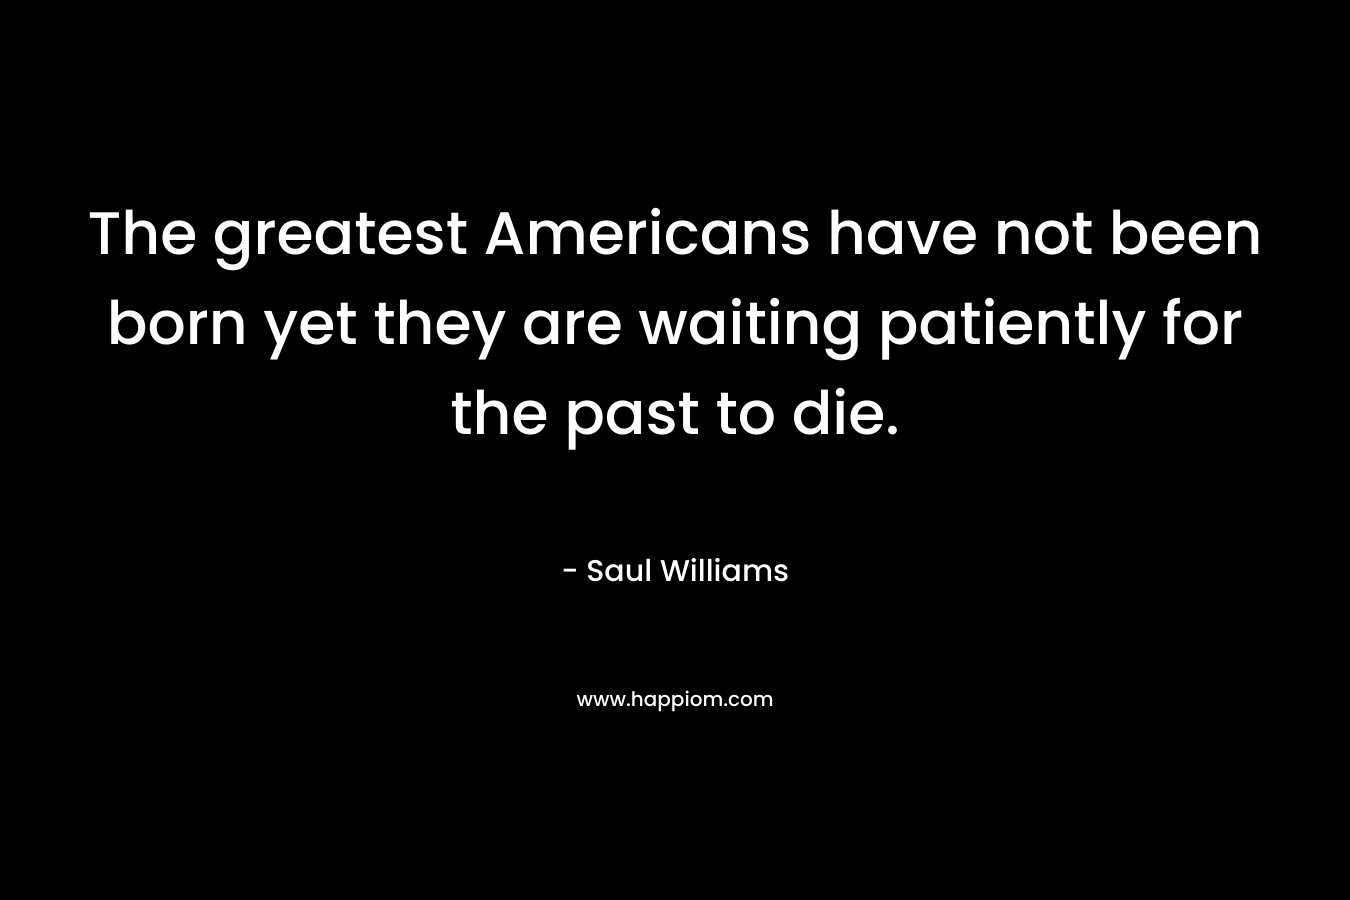 The greatest Americans have not been born yet they are waiting patiently for the past to die.